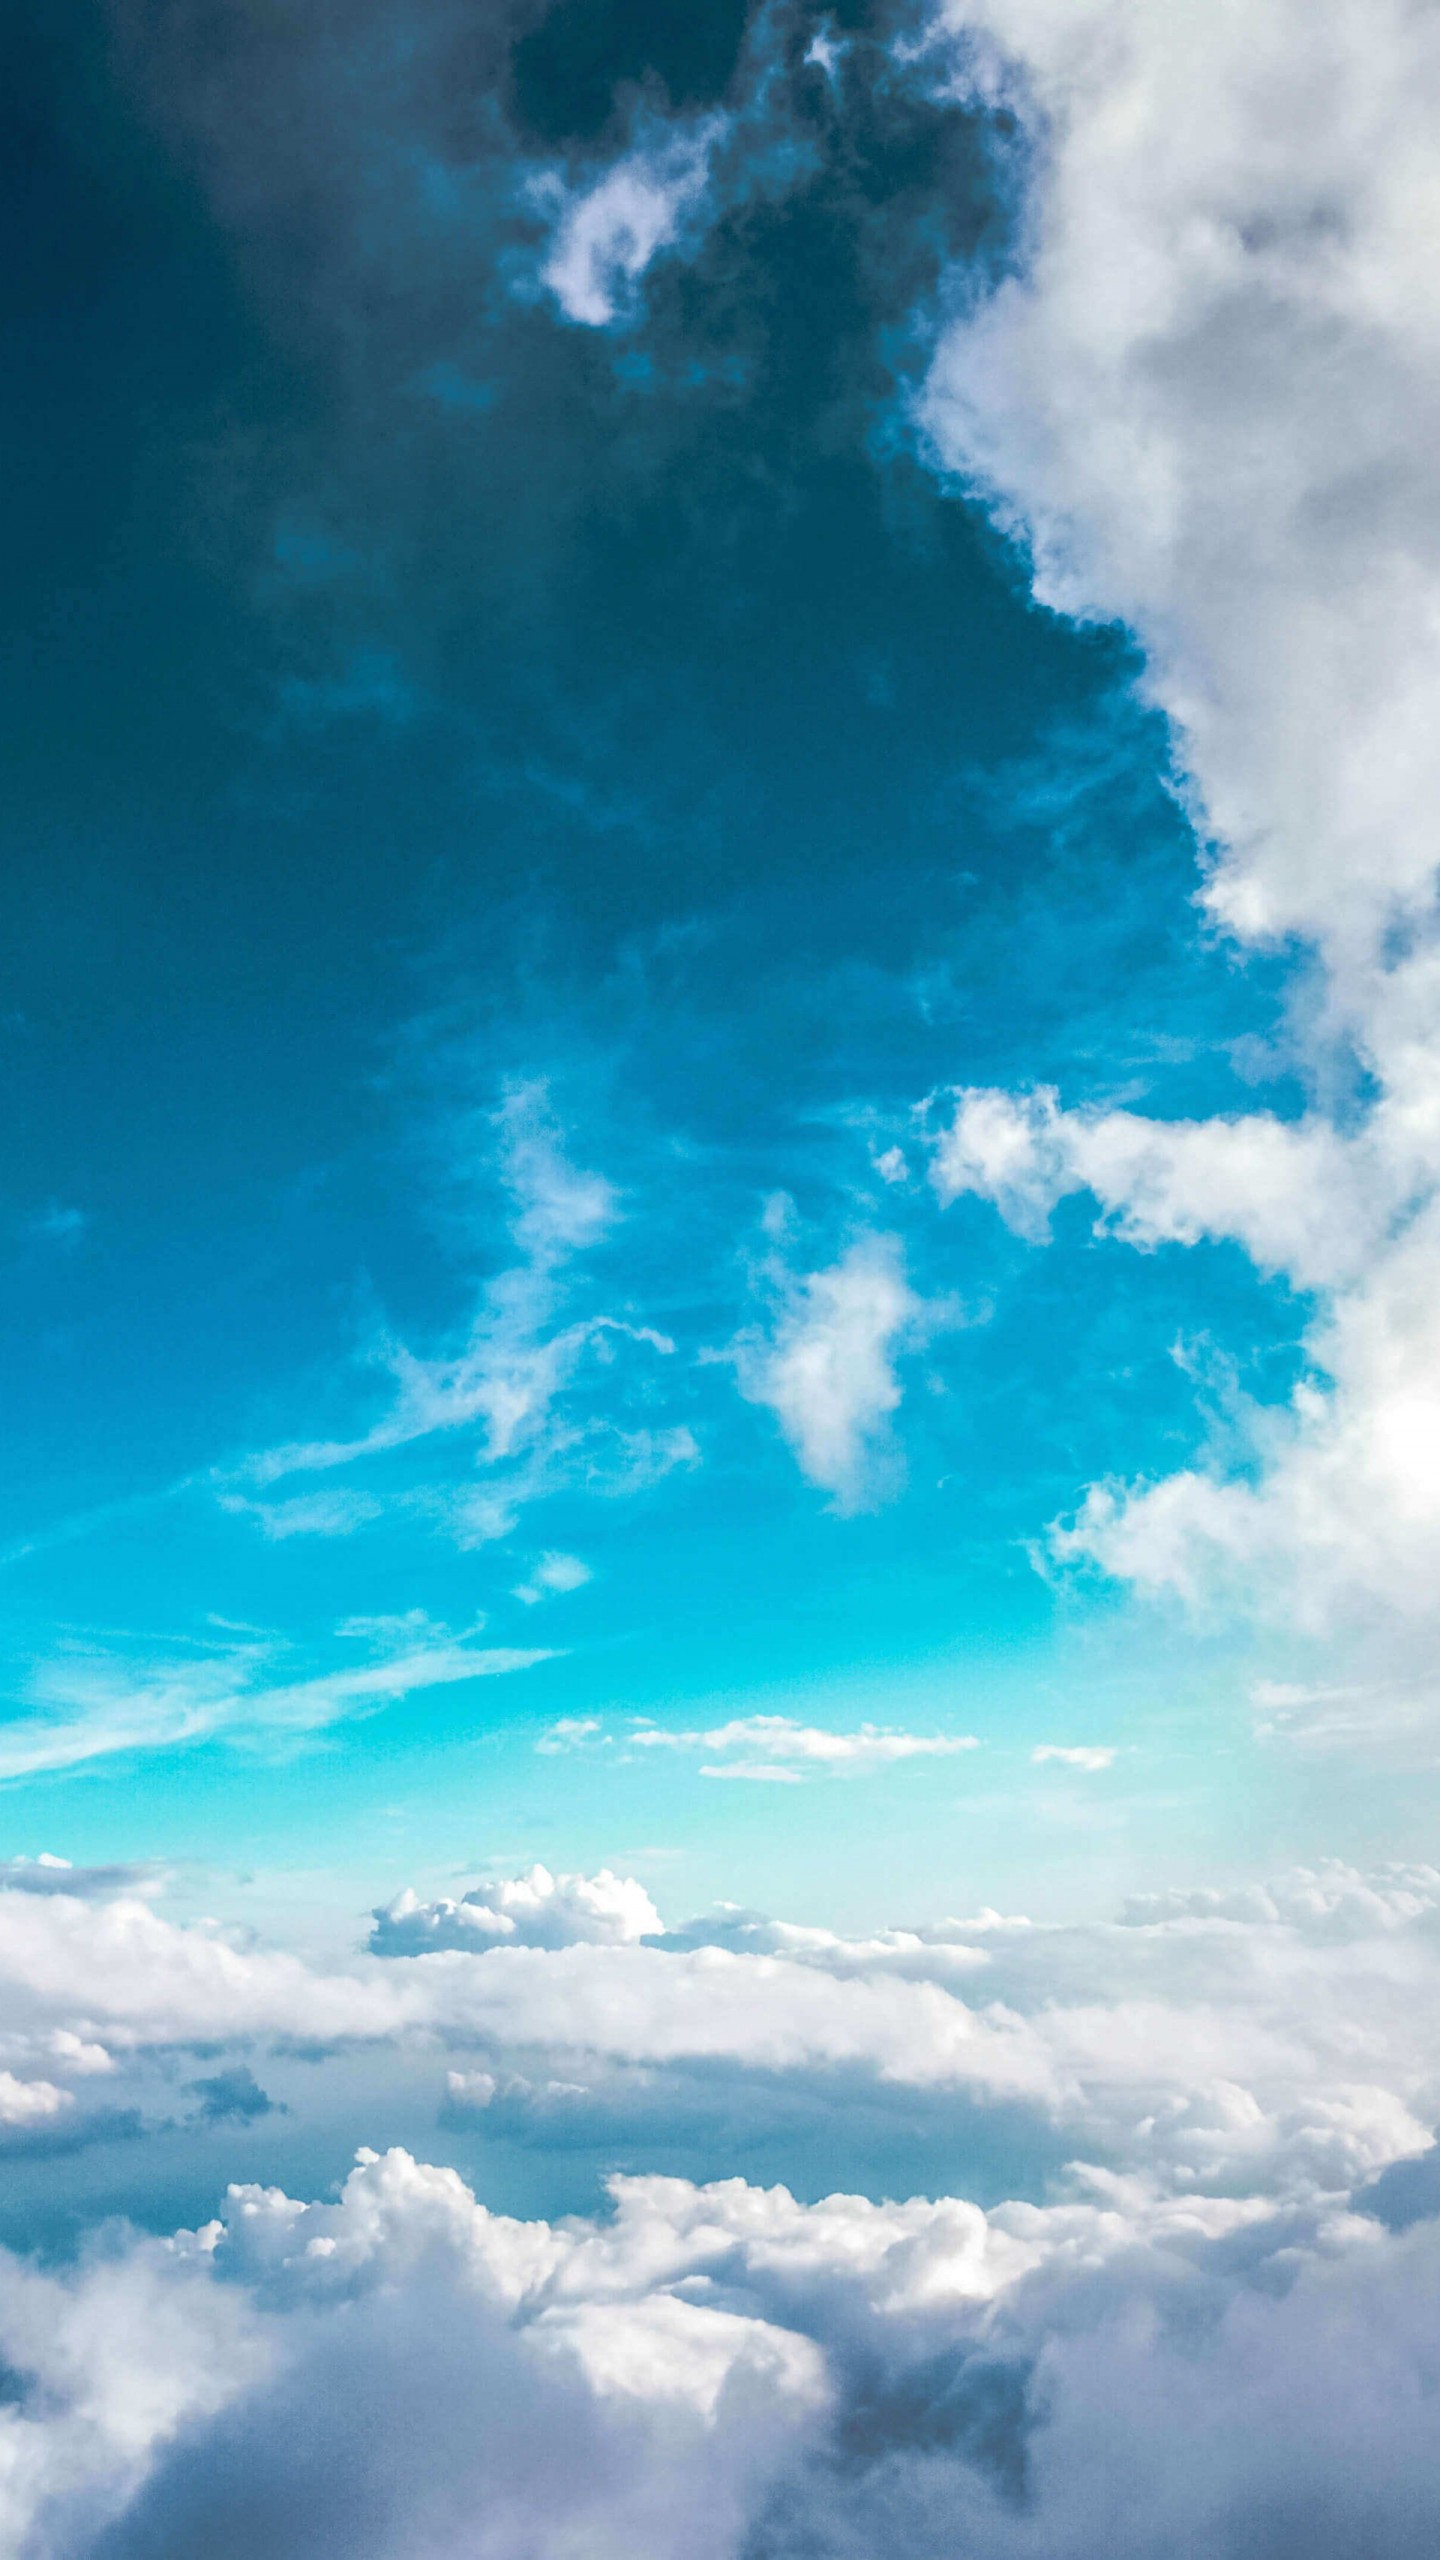 Cloudy Blue Sky Wallpaper for LG G3